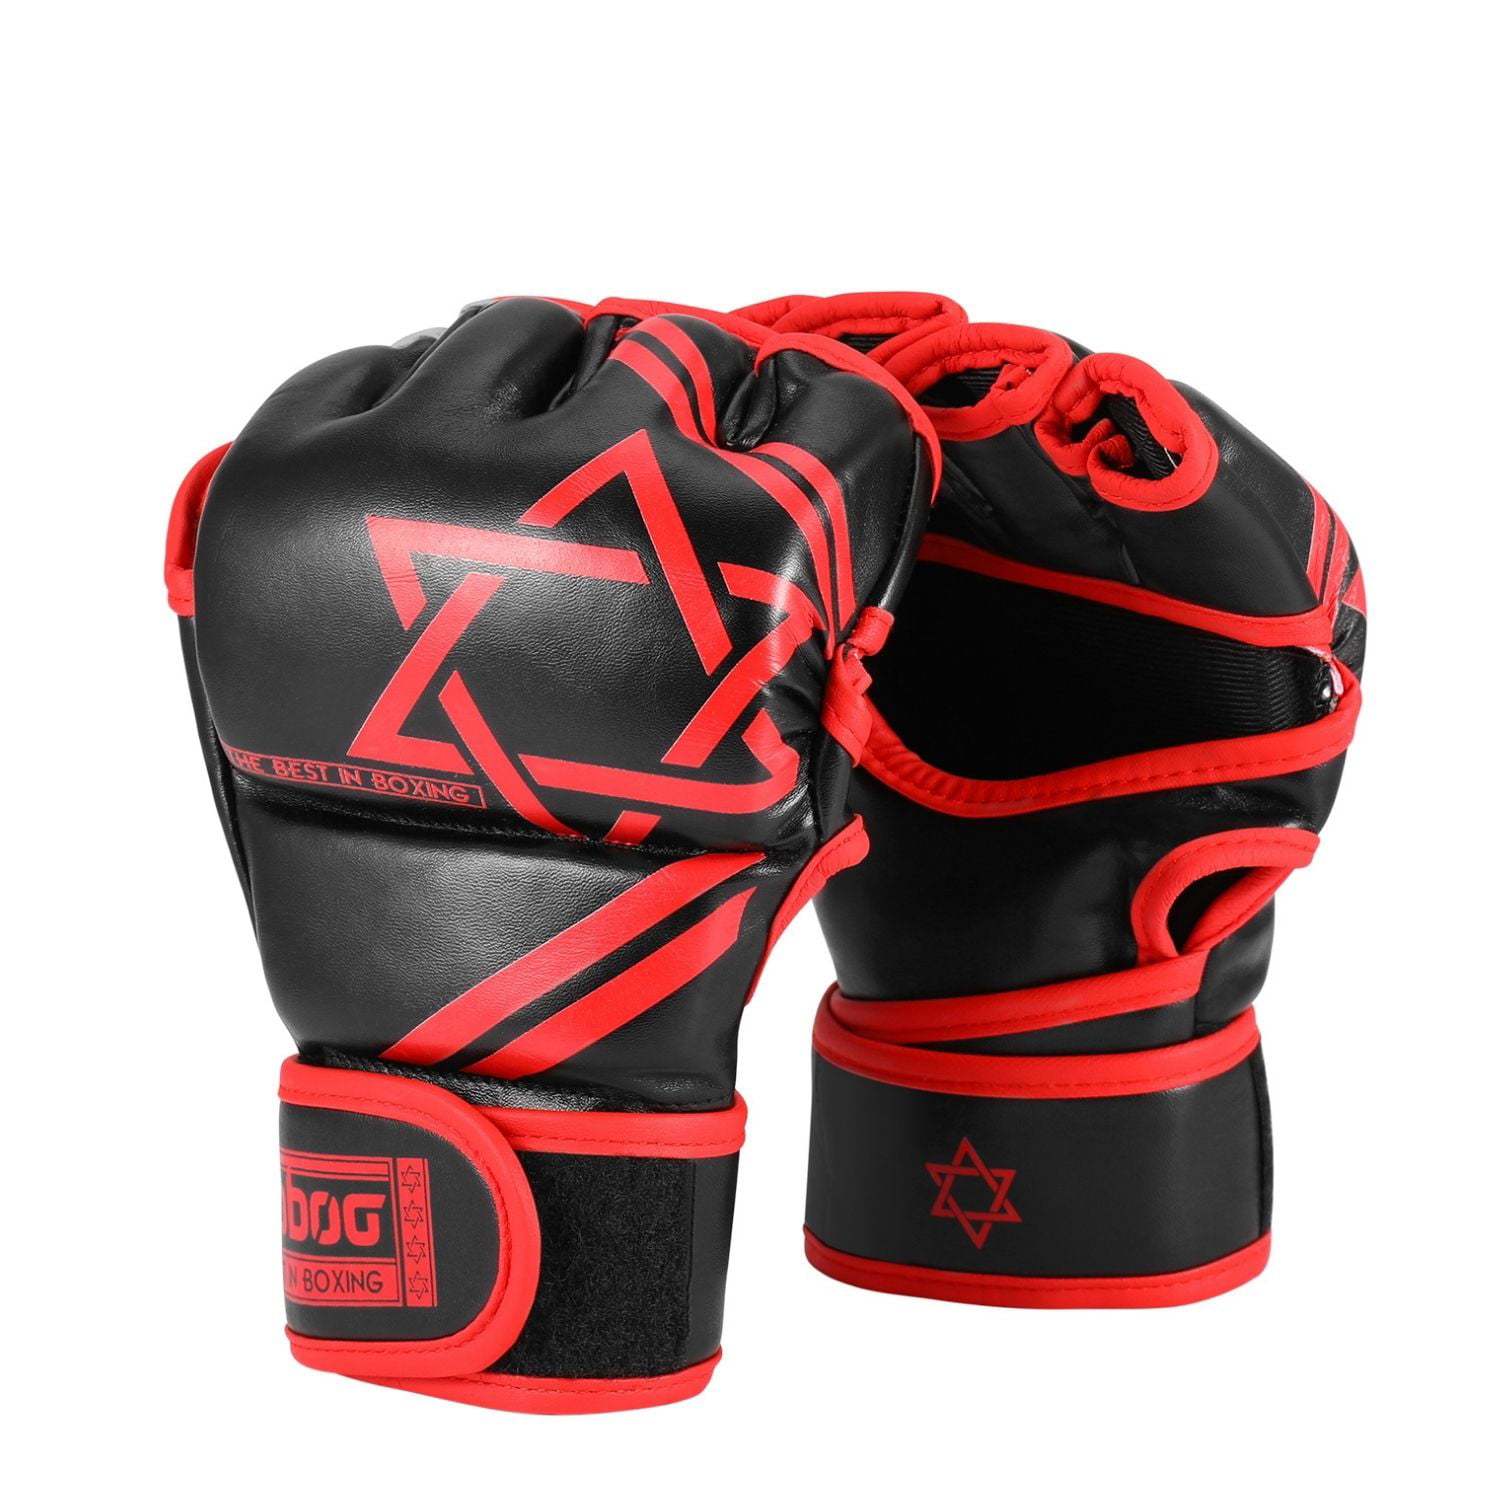 NEW MMA Grappling Gloves Boxing Punch Bag Fight Muay Thai Training Mitts Spall 